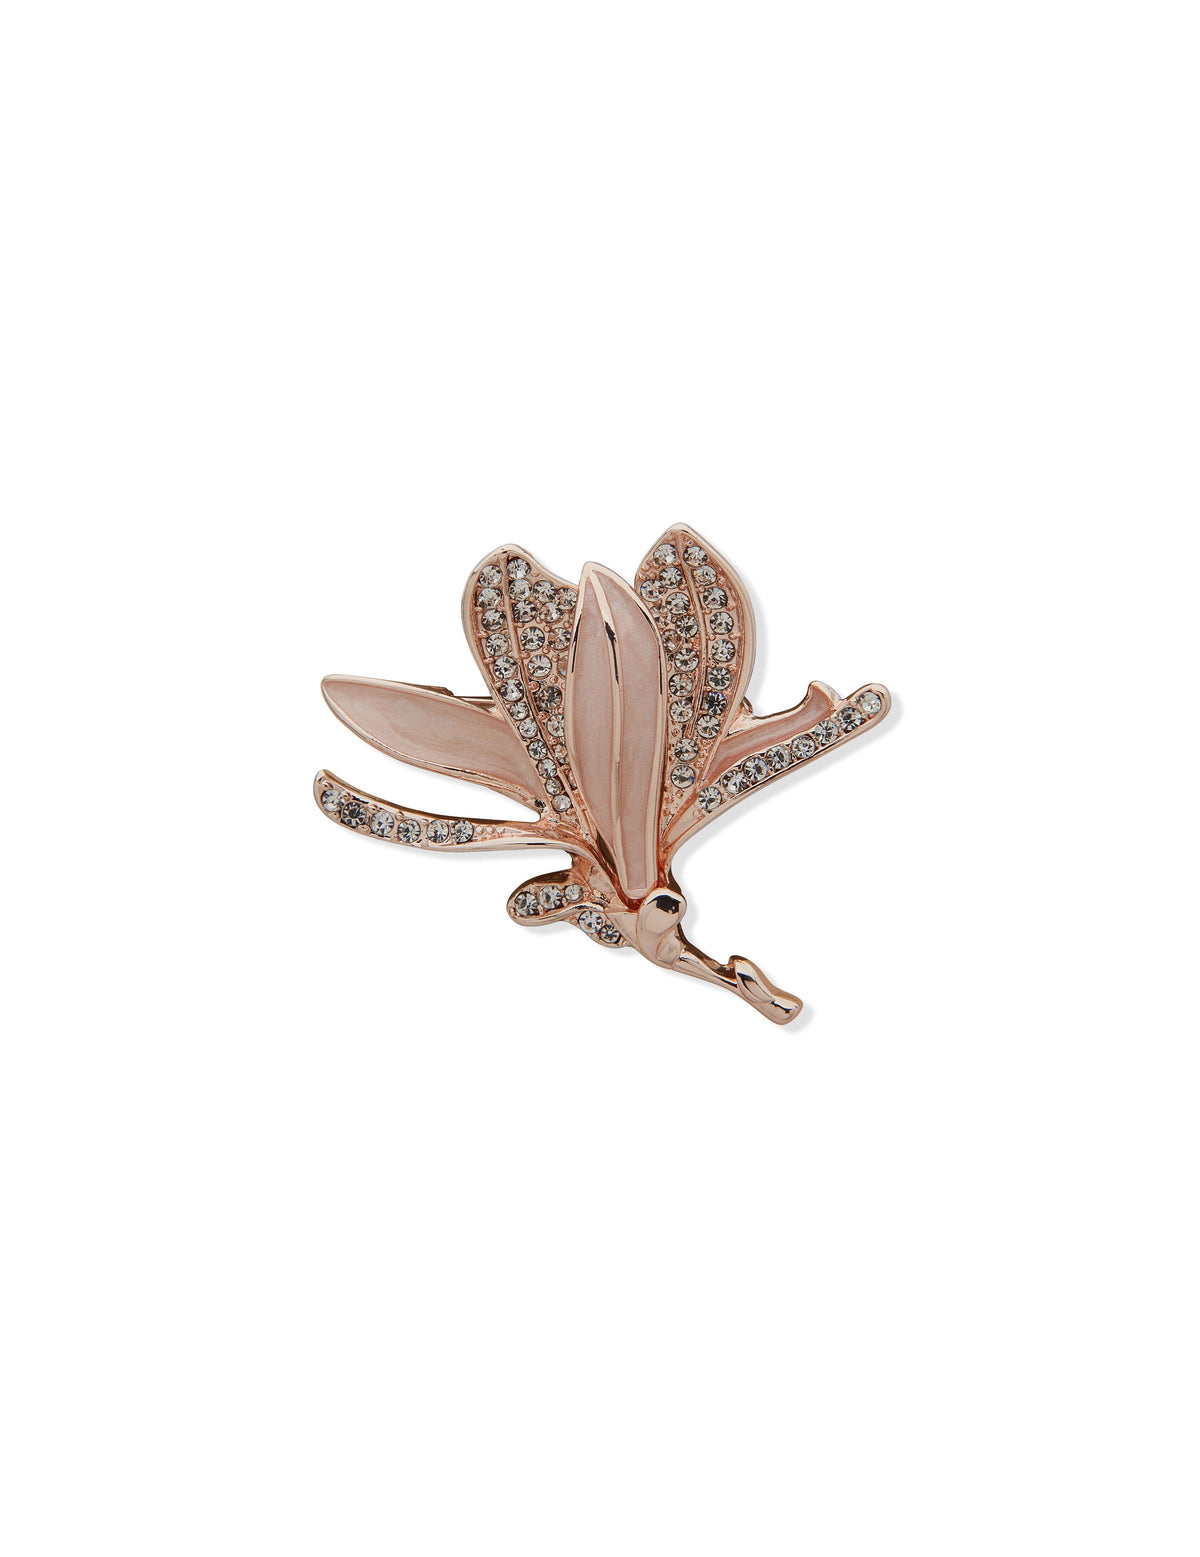 Anne Klein Rose Gold Tone Blossom Flower Pin in Gift Box